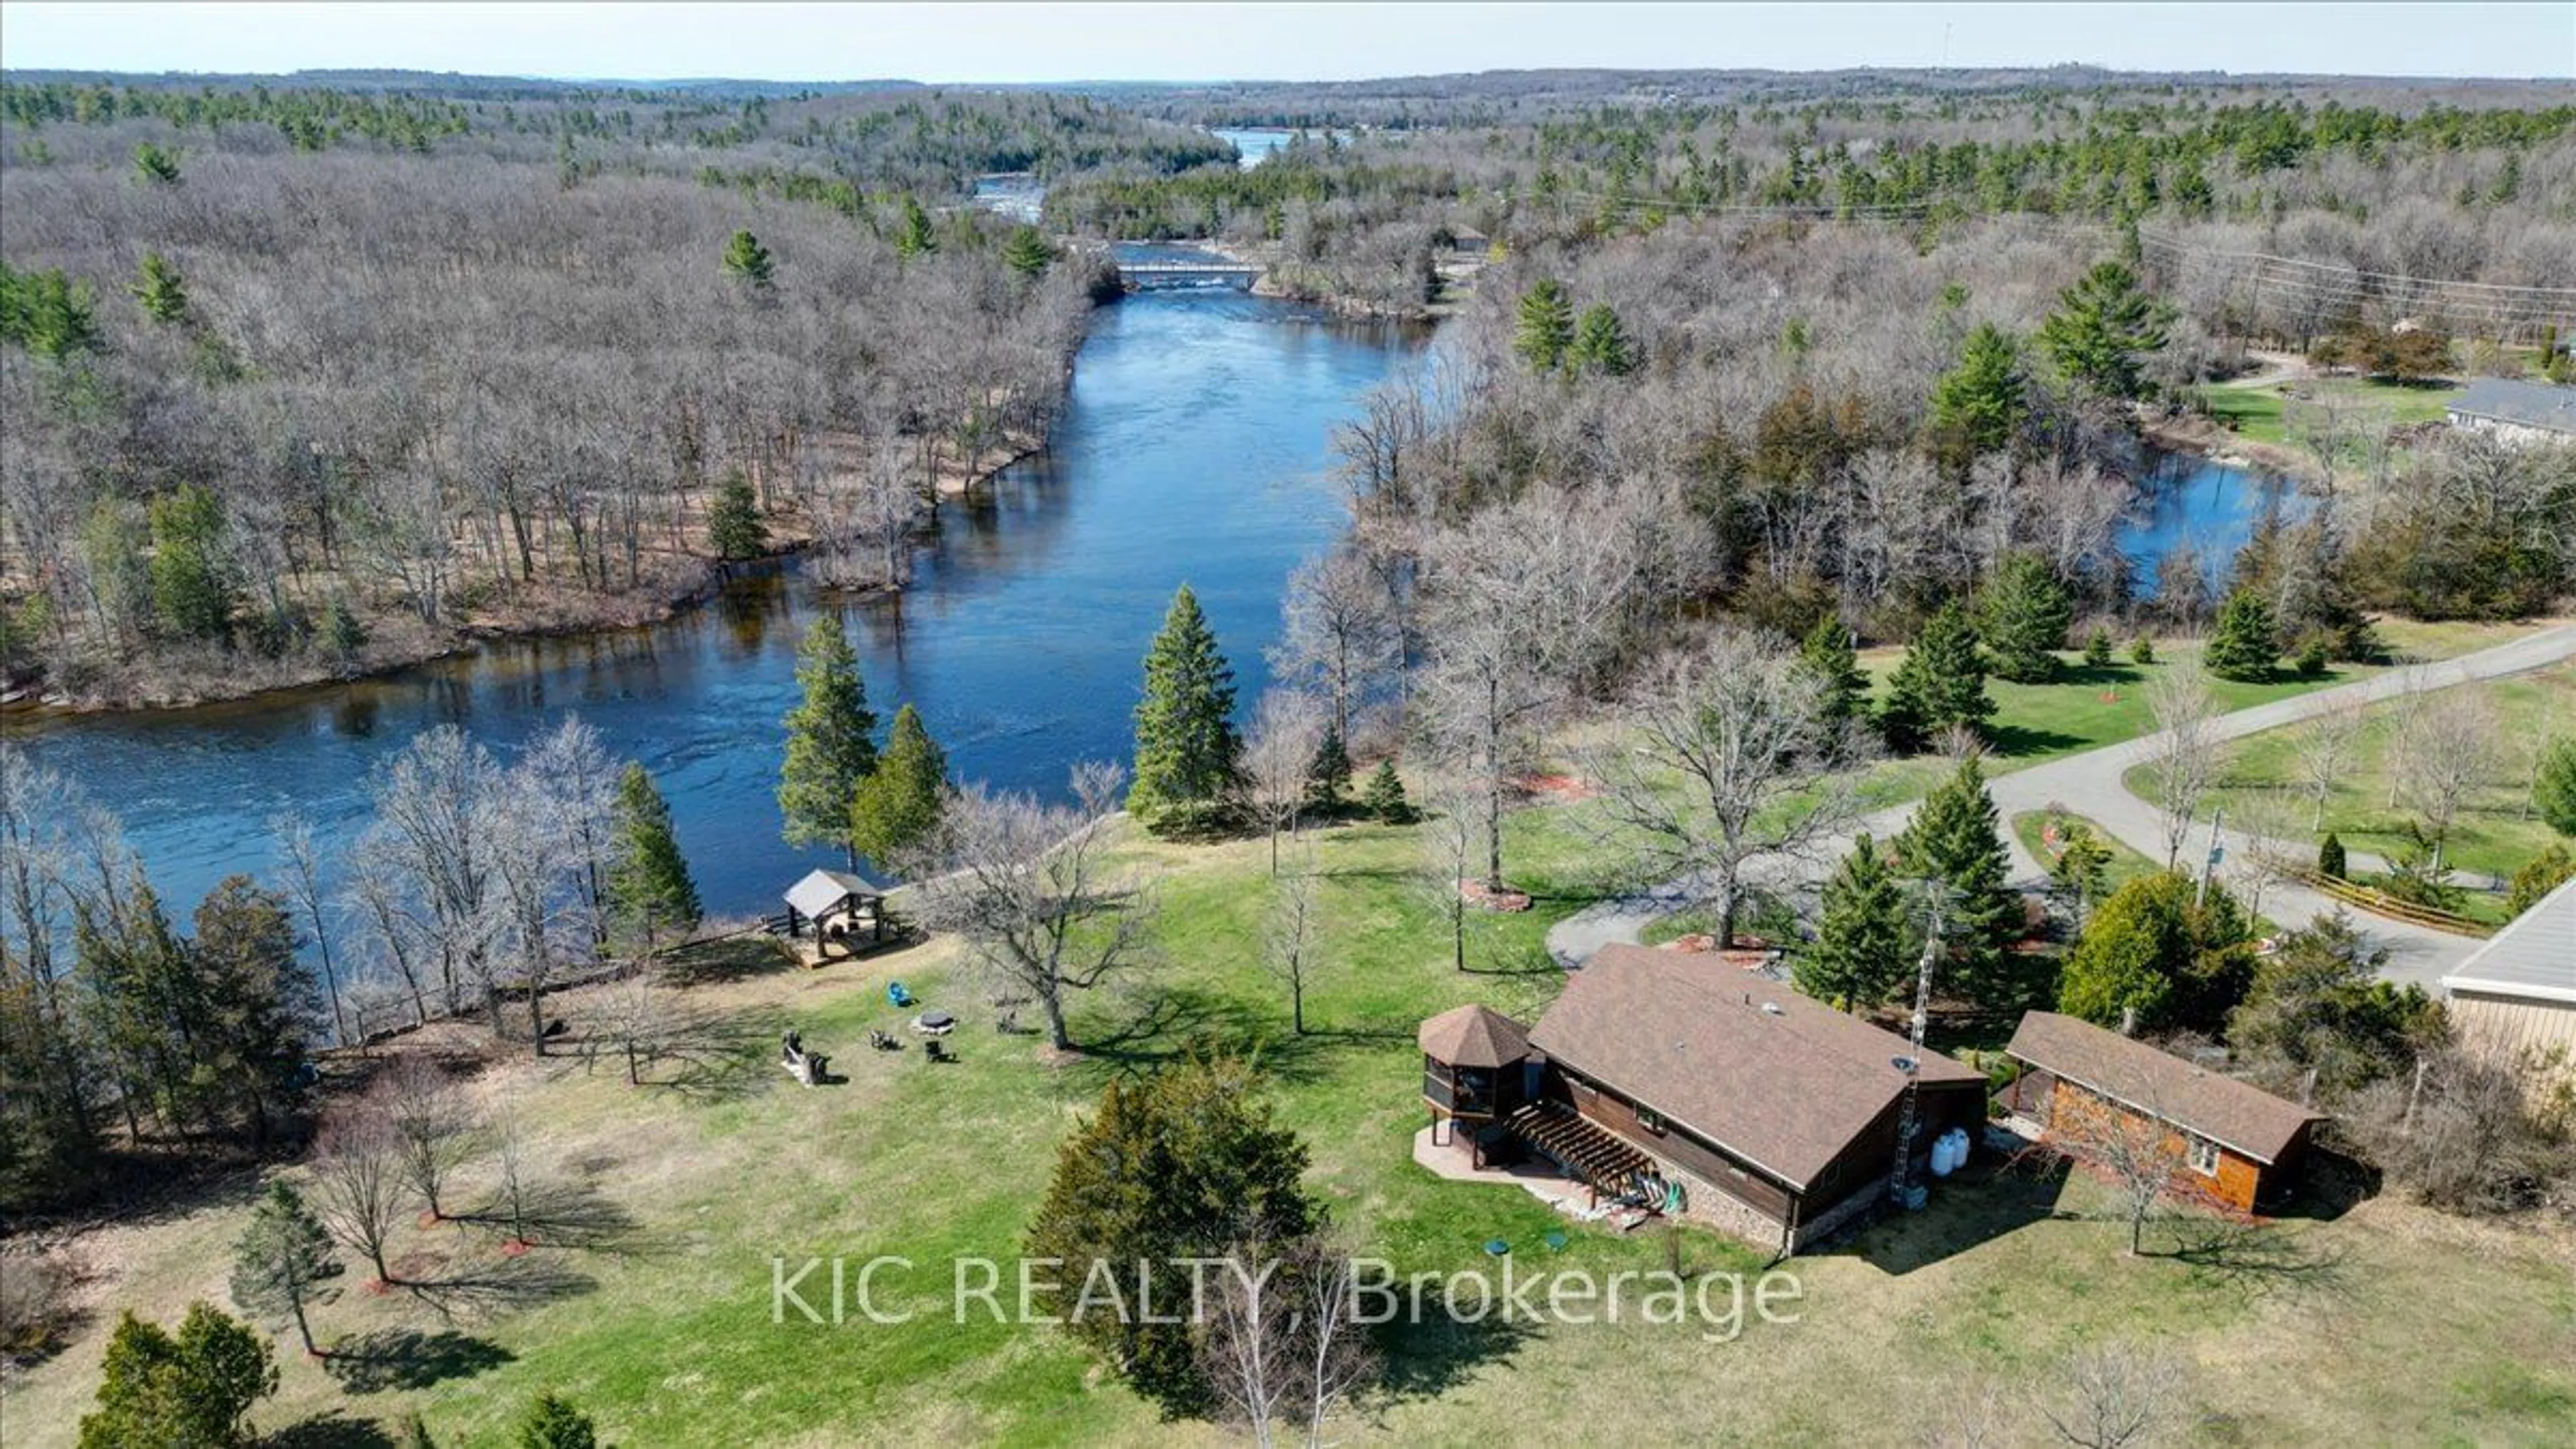 Lakeview for 785 Crowe River Rd, Trent Hills Ontario K0K 2M0